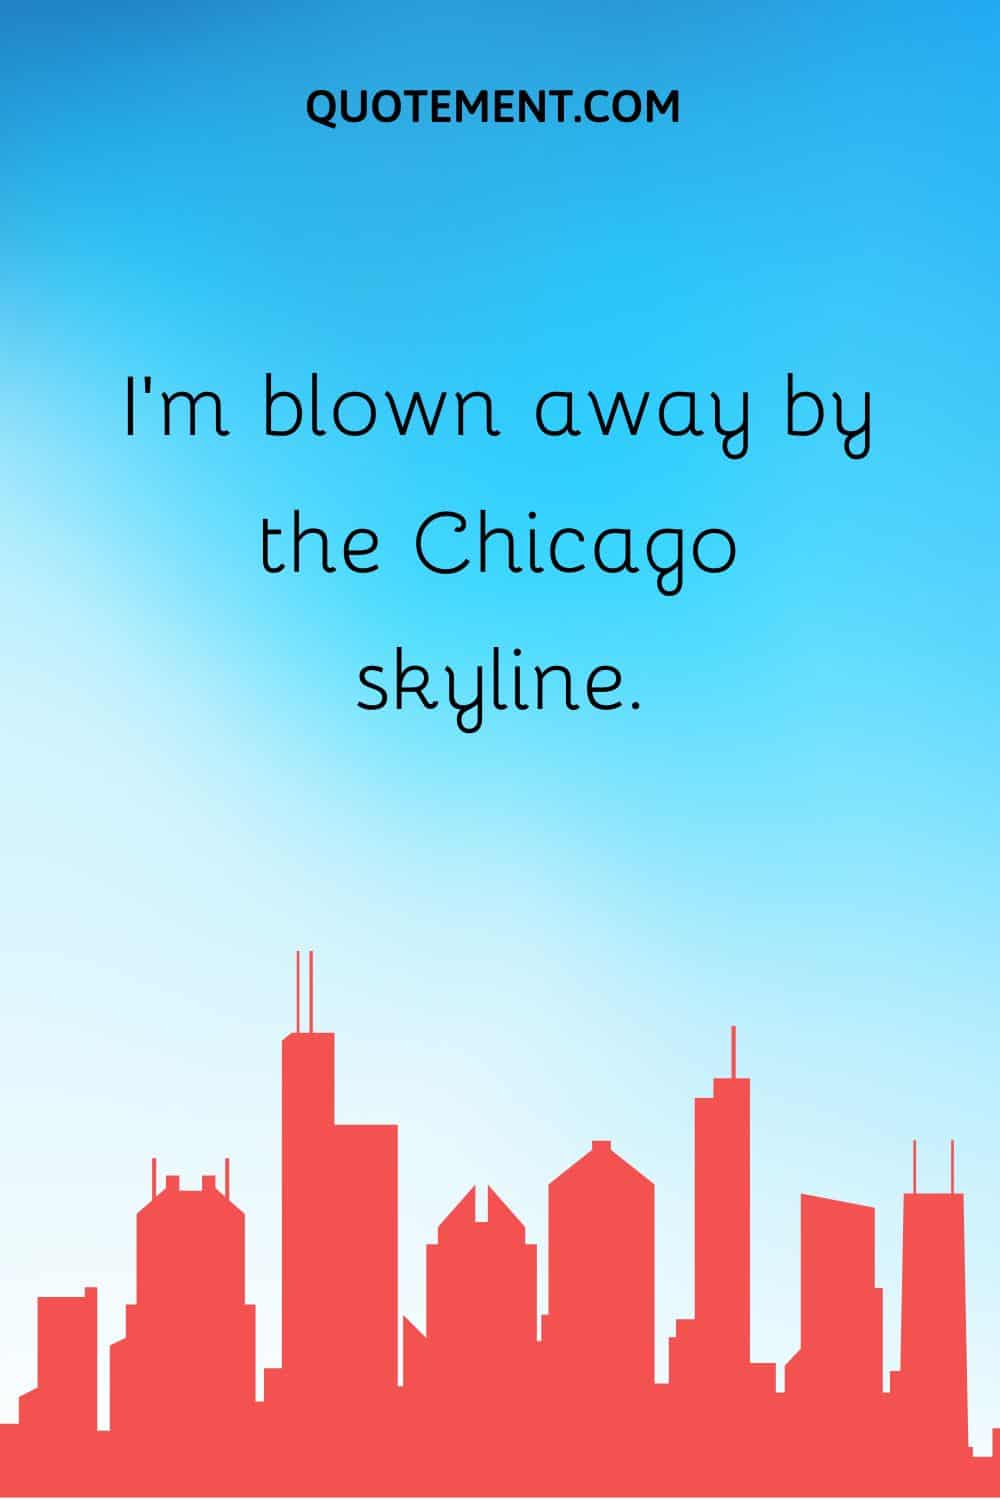 I’m blown away by the Chicago skyline.